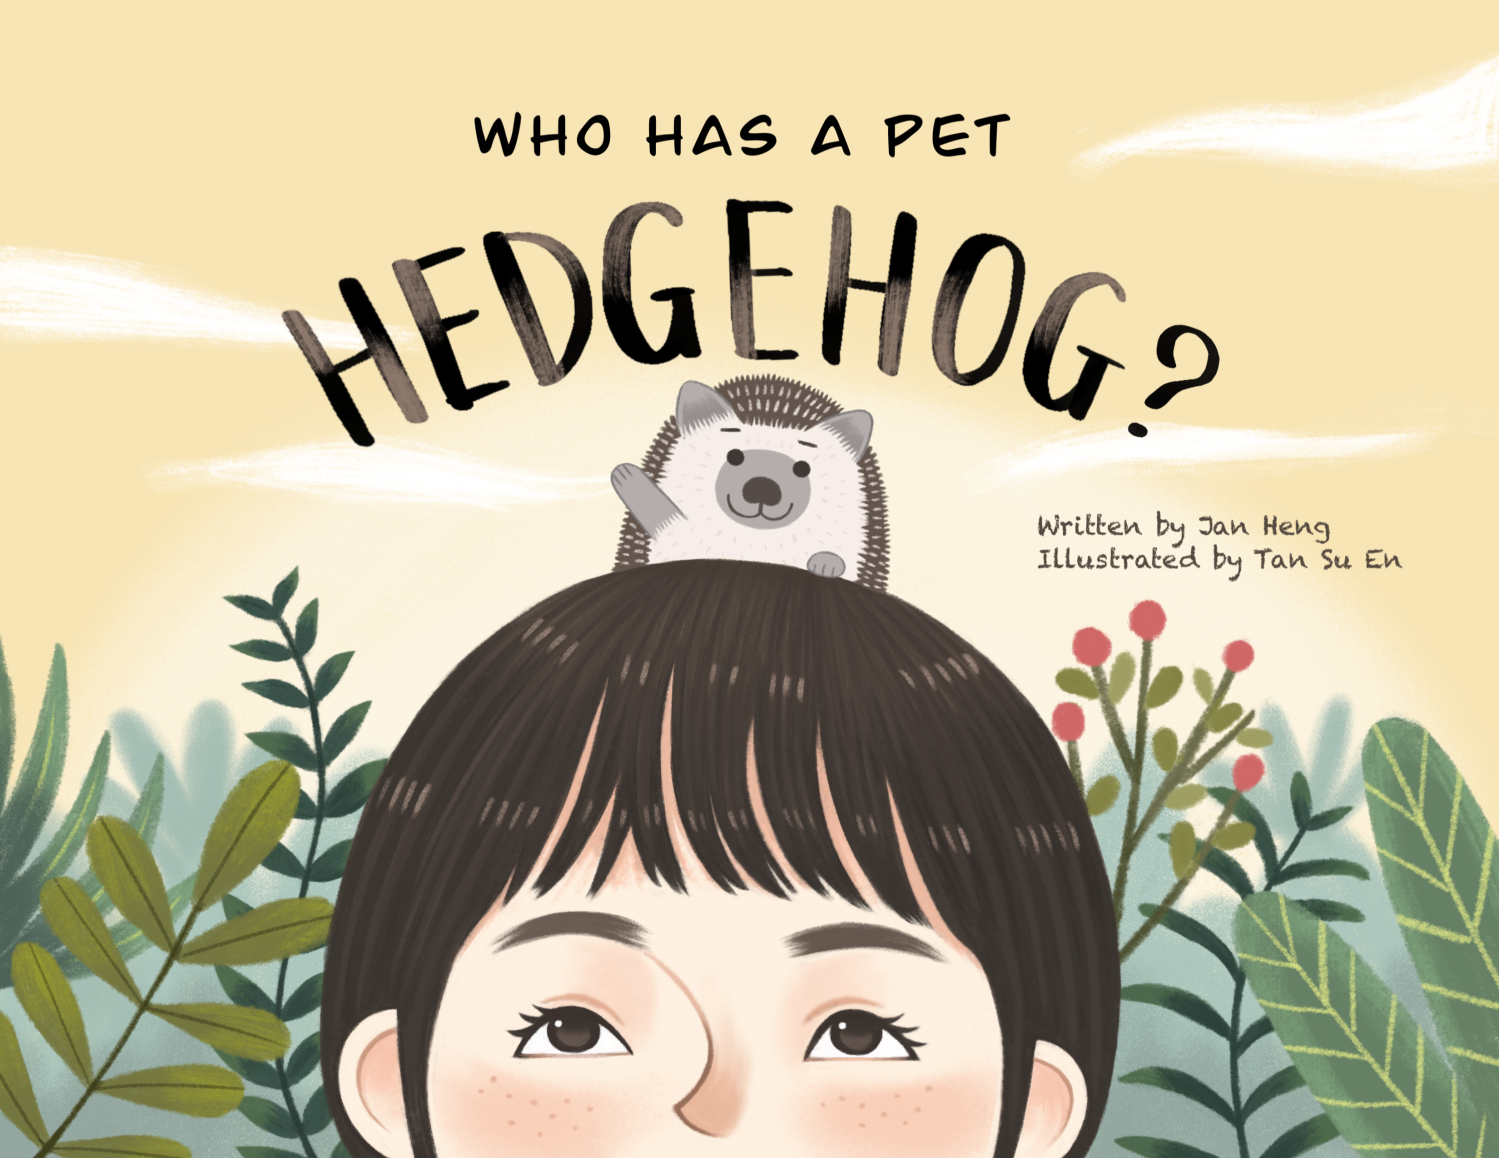 Pet reading 5. Книгиpet. Books about Pets. How to describe a Hedgehog.